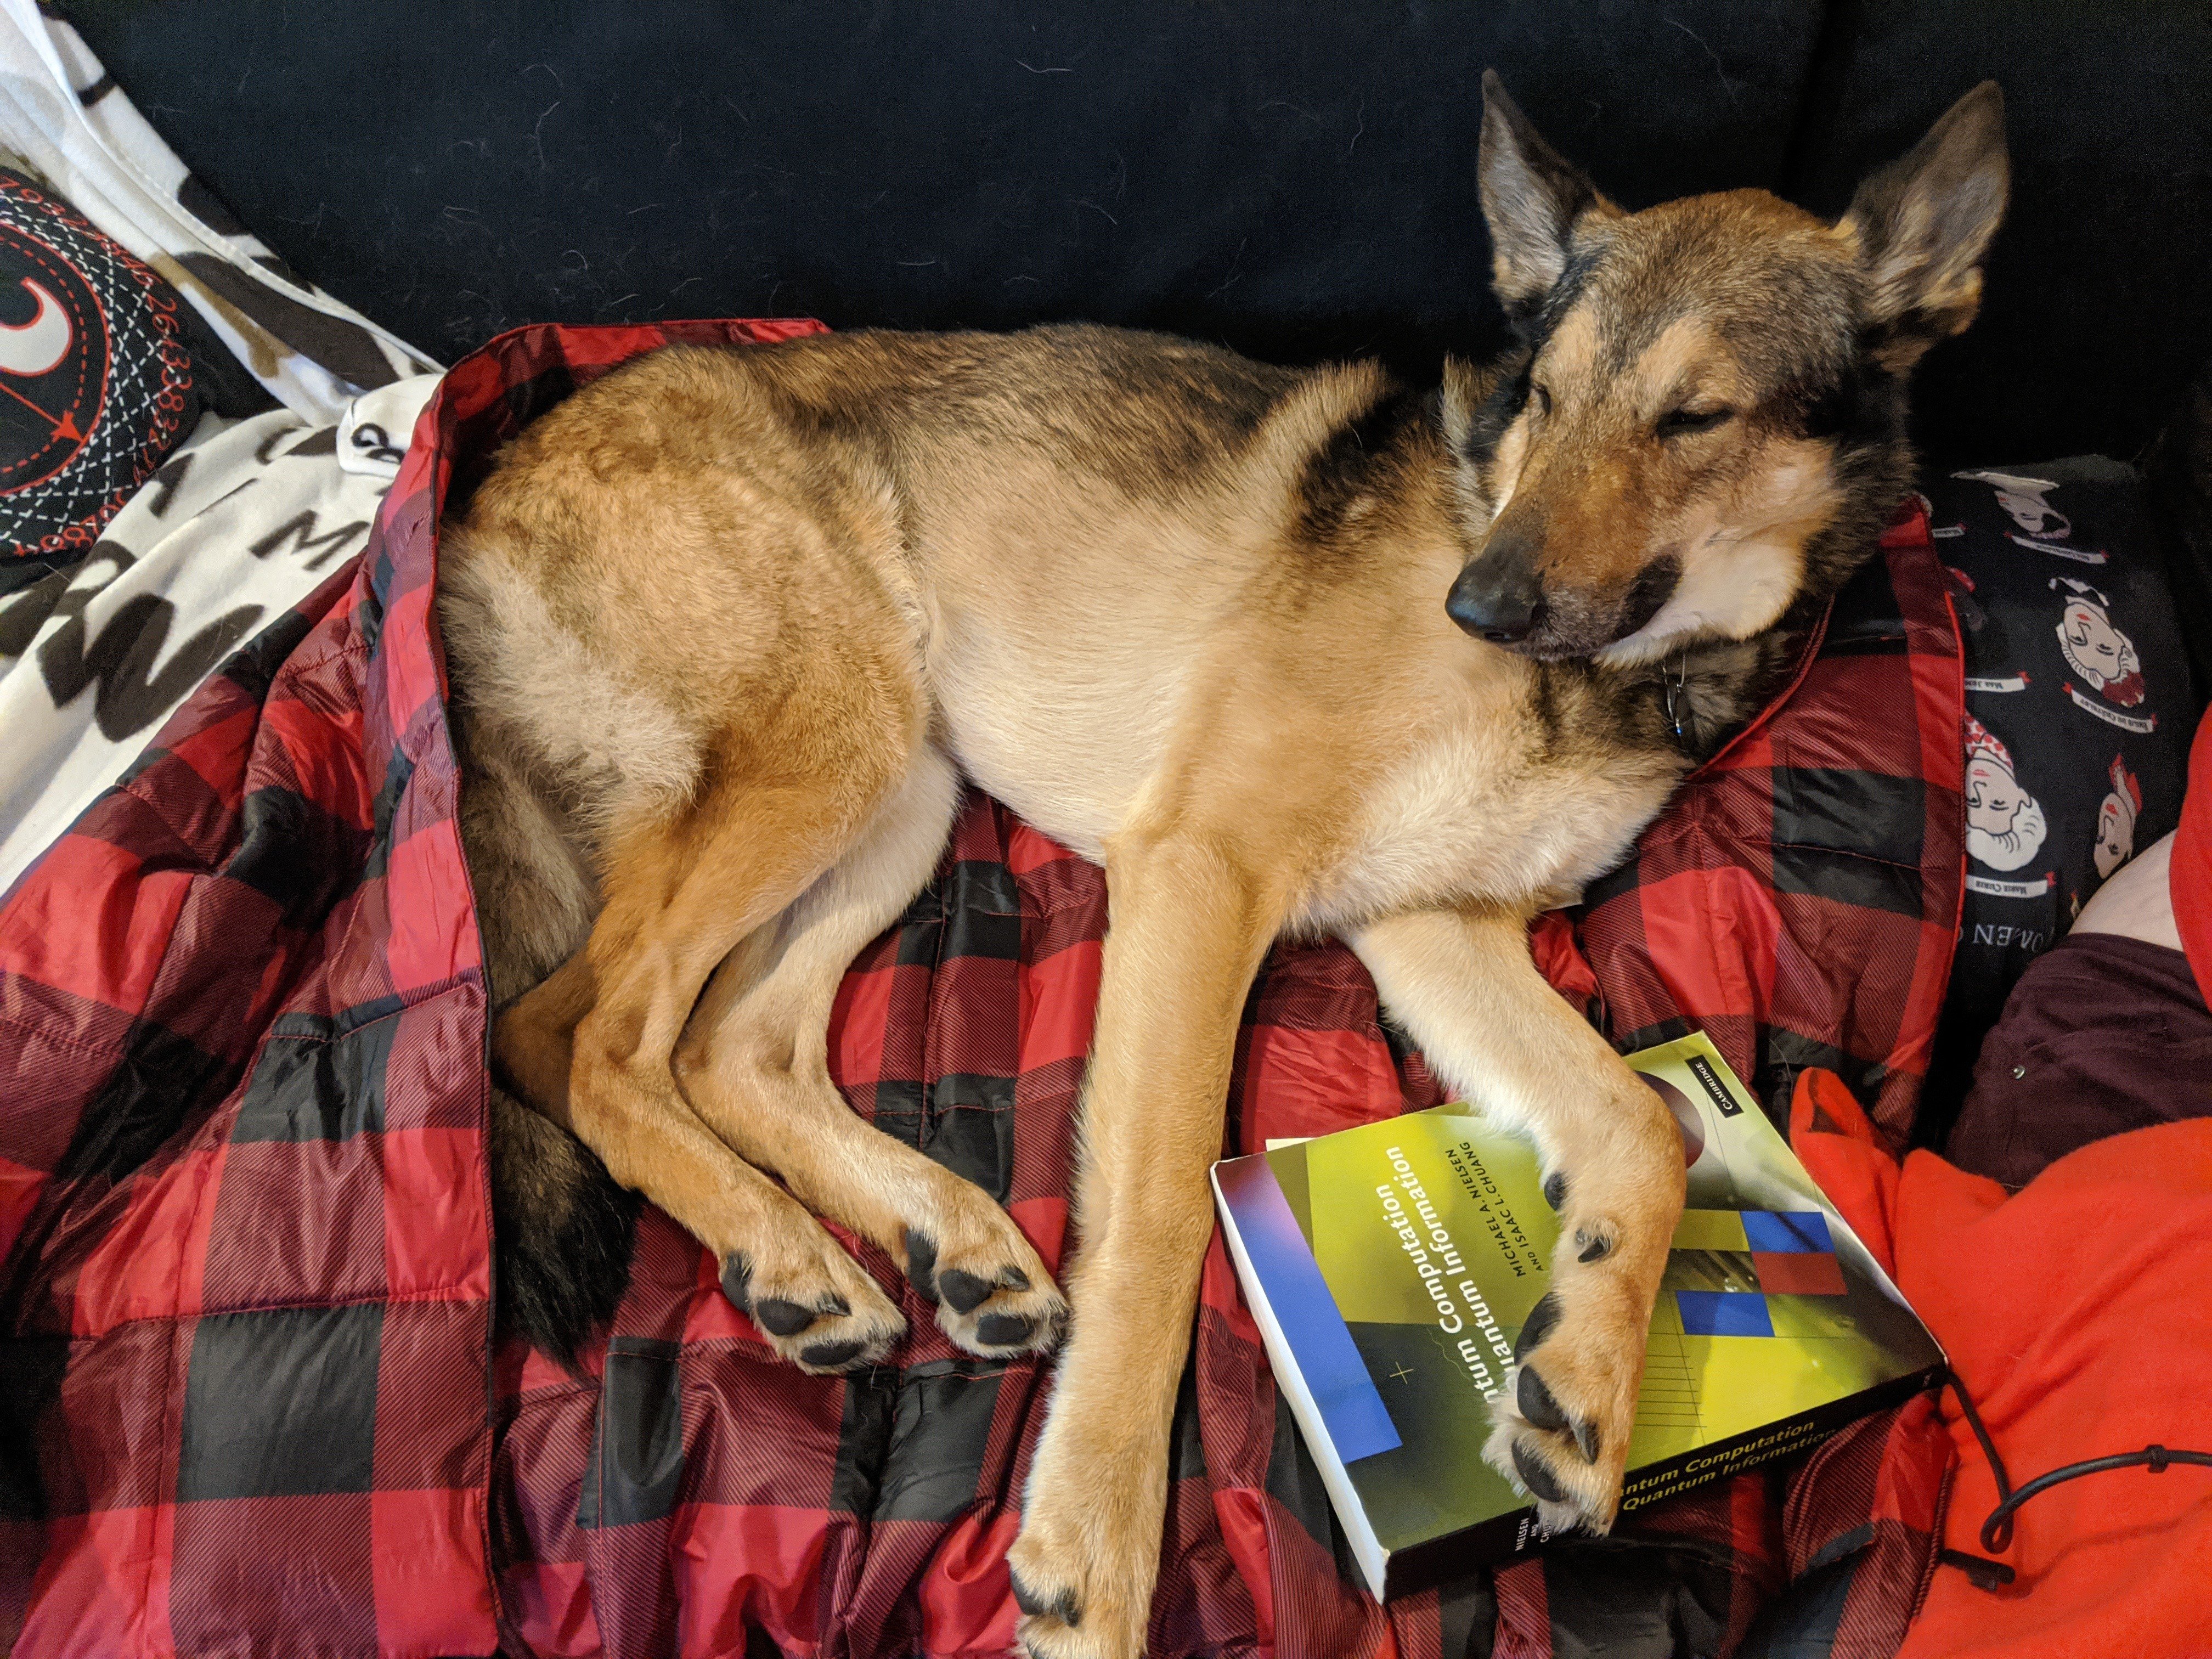 Sarah's  German Shepard named Chewie curled up on the couch with a quantum textbook